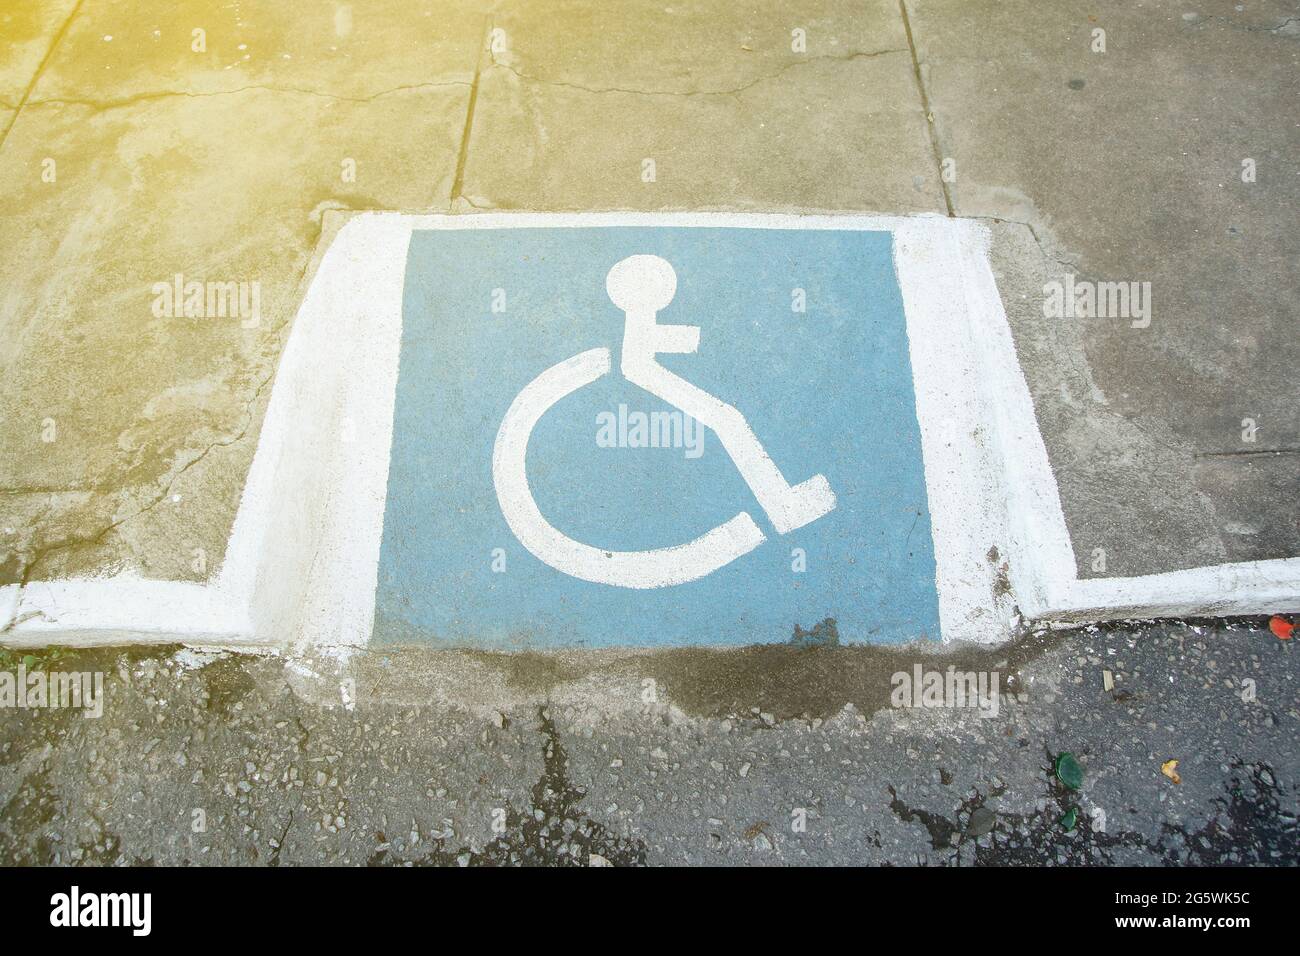 accessibility ramp for wheelchair users with accessibility symbol design Stock Photo